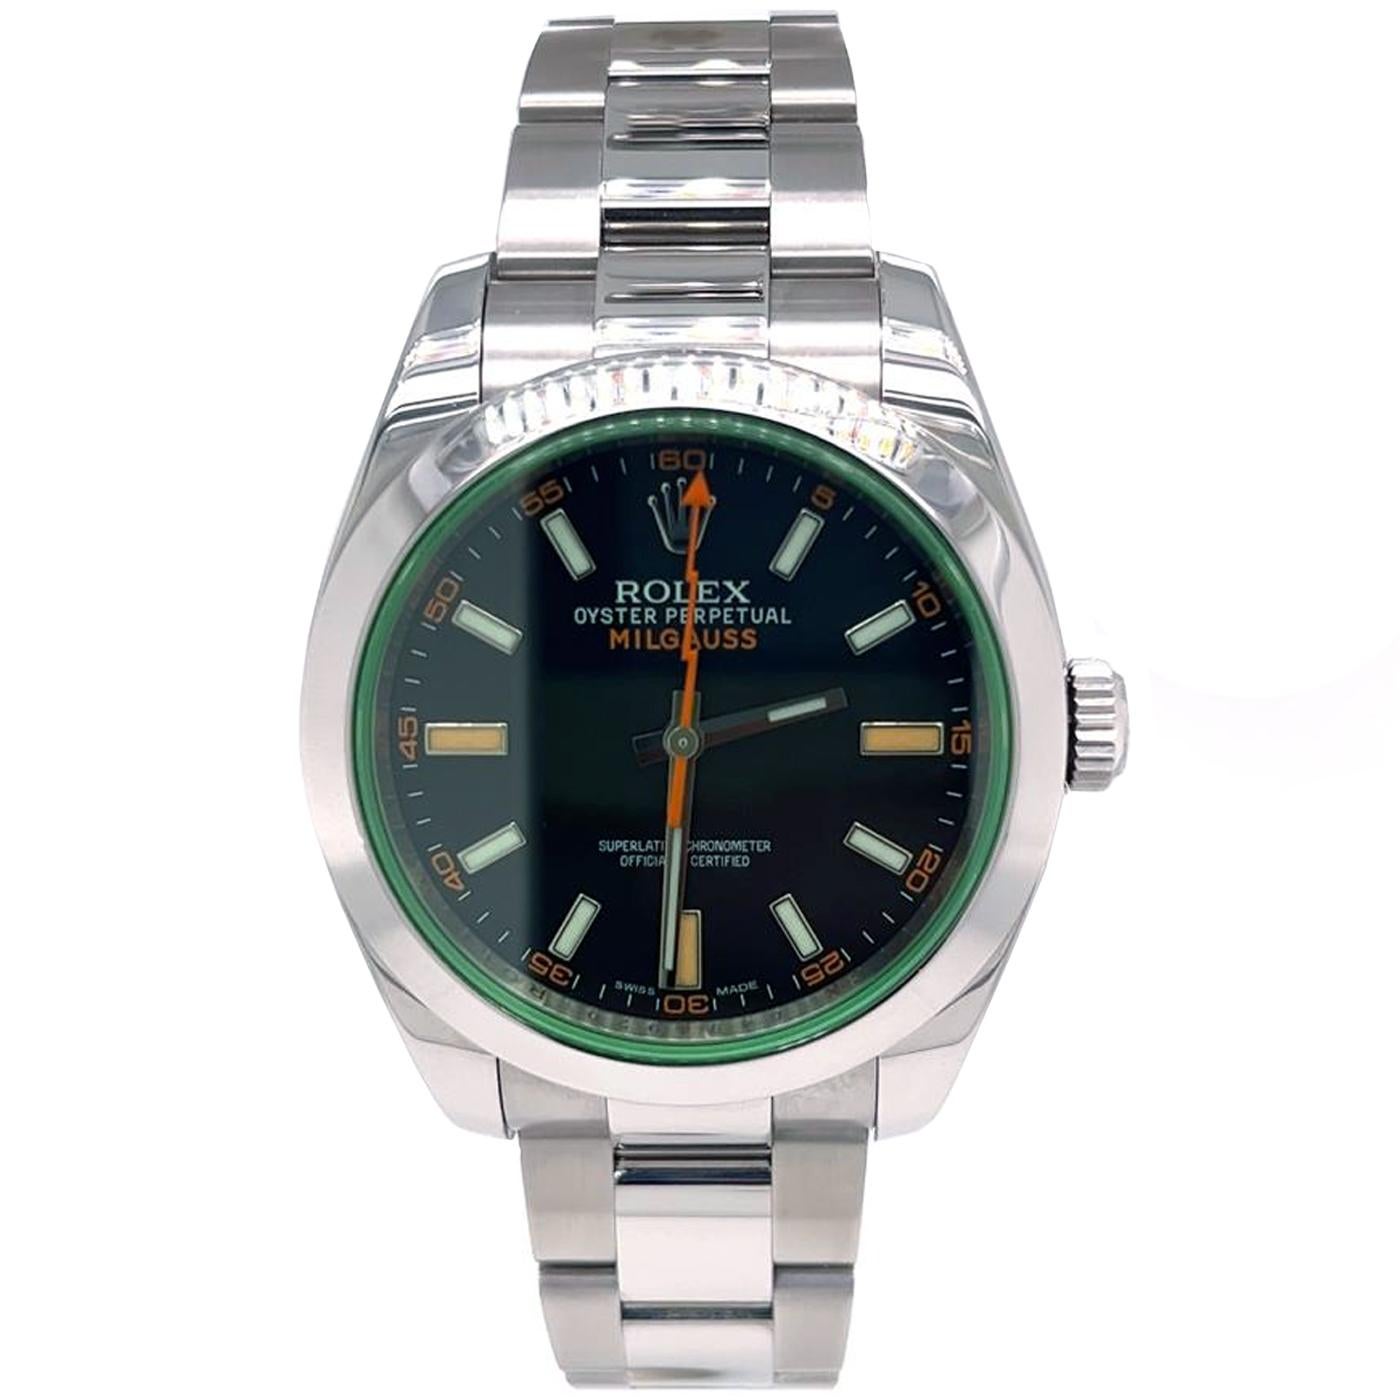 This Oyster Perpetual Milgauss Features a Black Dial with Luminescent Hour Markers, a Green Sapphire Crystal Produces Light Reflections While Preserving Optimal Legibility. with Its Clean Lines and Evocative Orange Seconds Hand, Shaped Like a